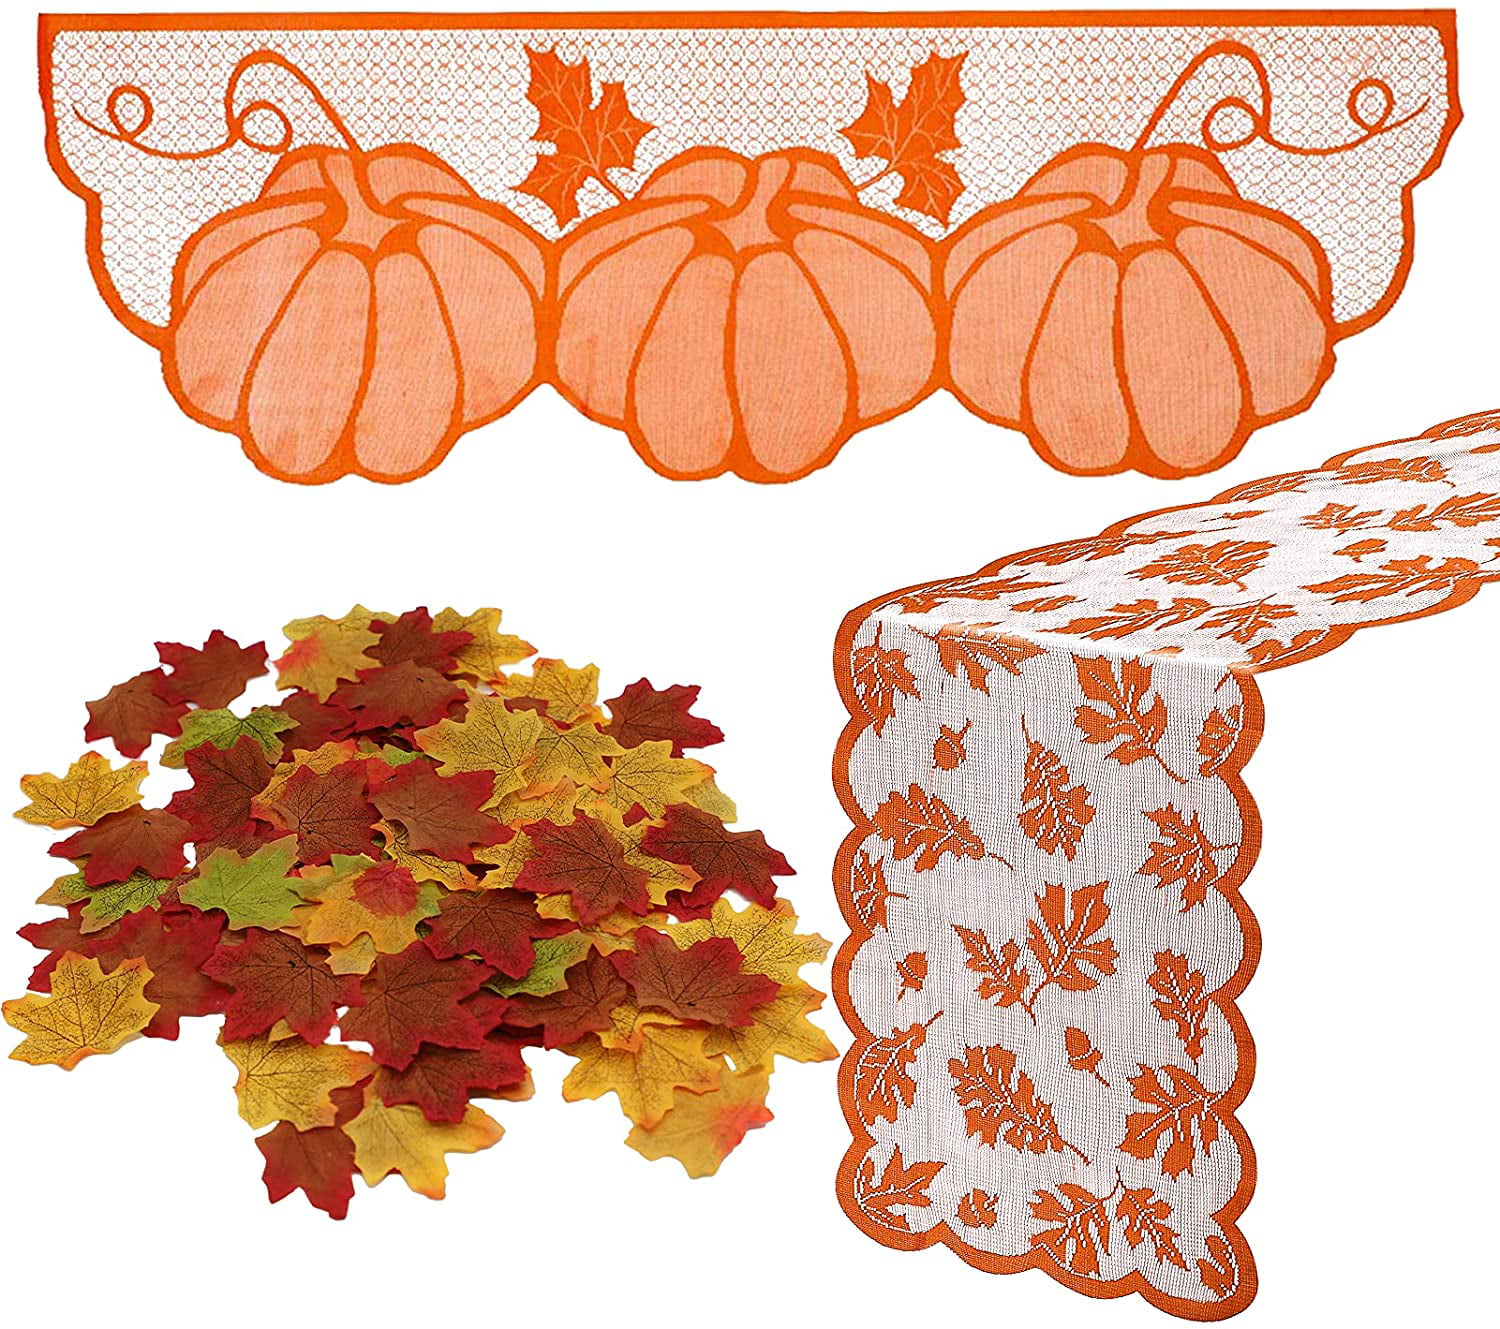 Thanksgiving Decor Fall Table Runner Fireplace Scarf Thanksgiving Decorations Maple Leaves Pumpkin Table Runner Fall Decor for Thanksgiving Door Decorations Autumn Harvest Festive Party Seasonal Decor 